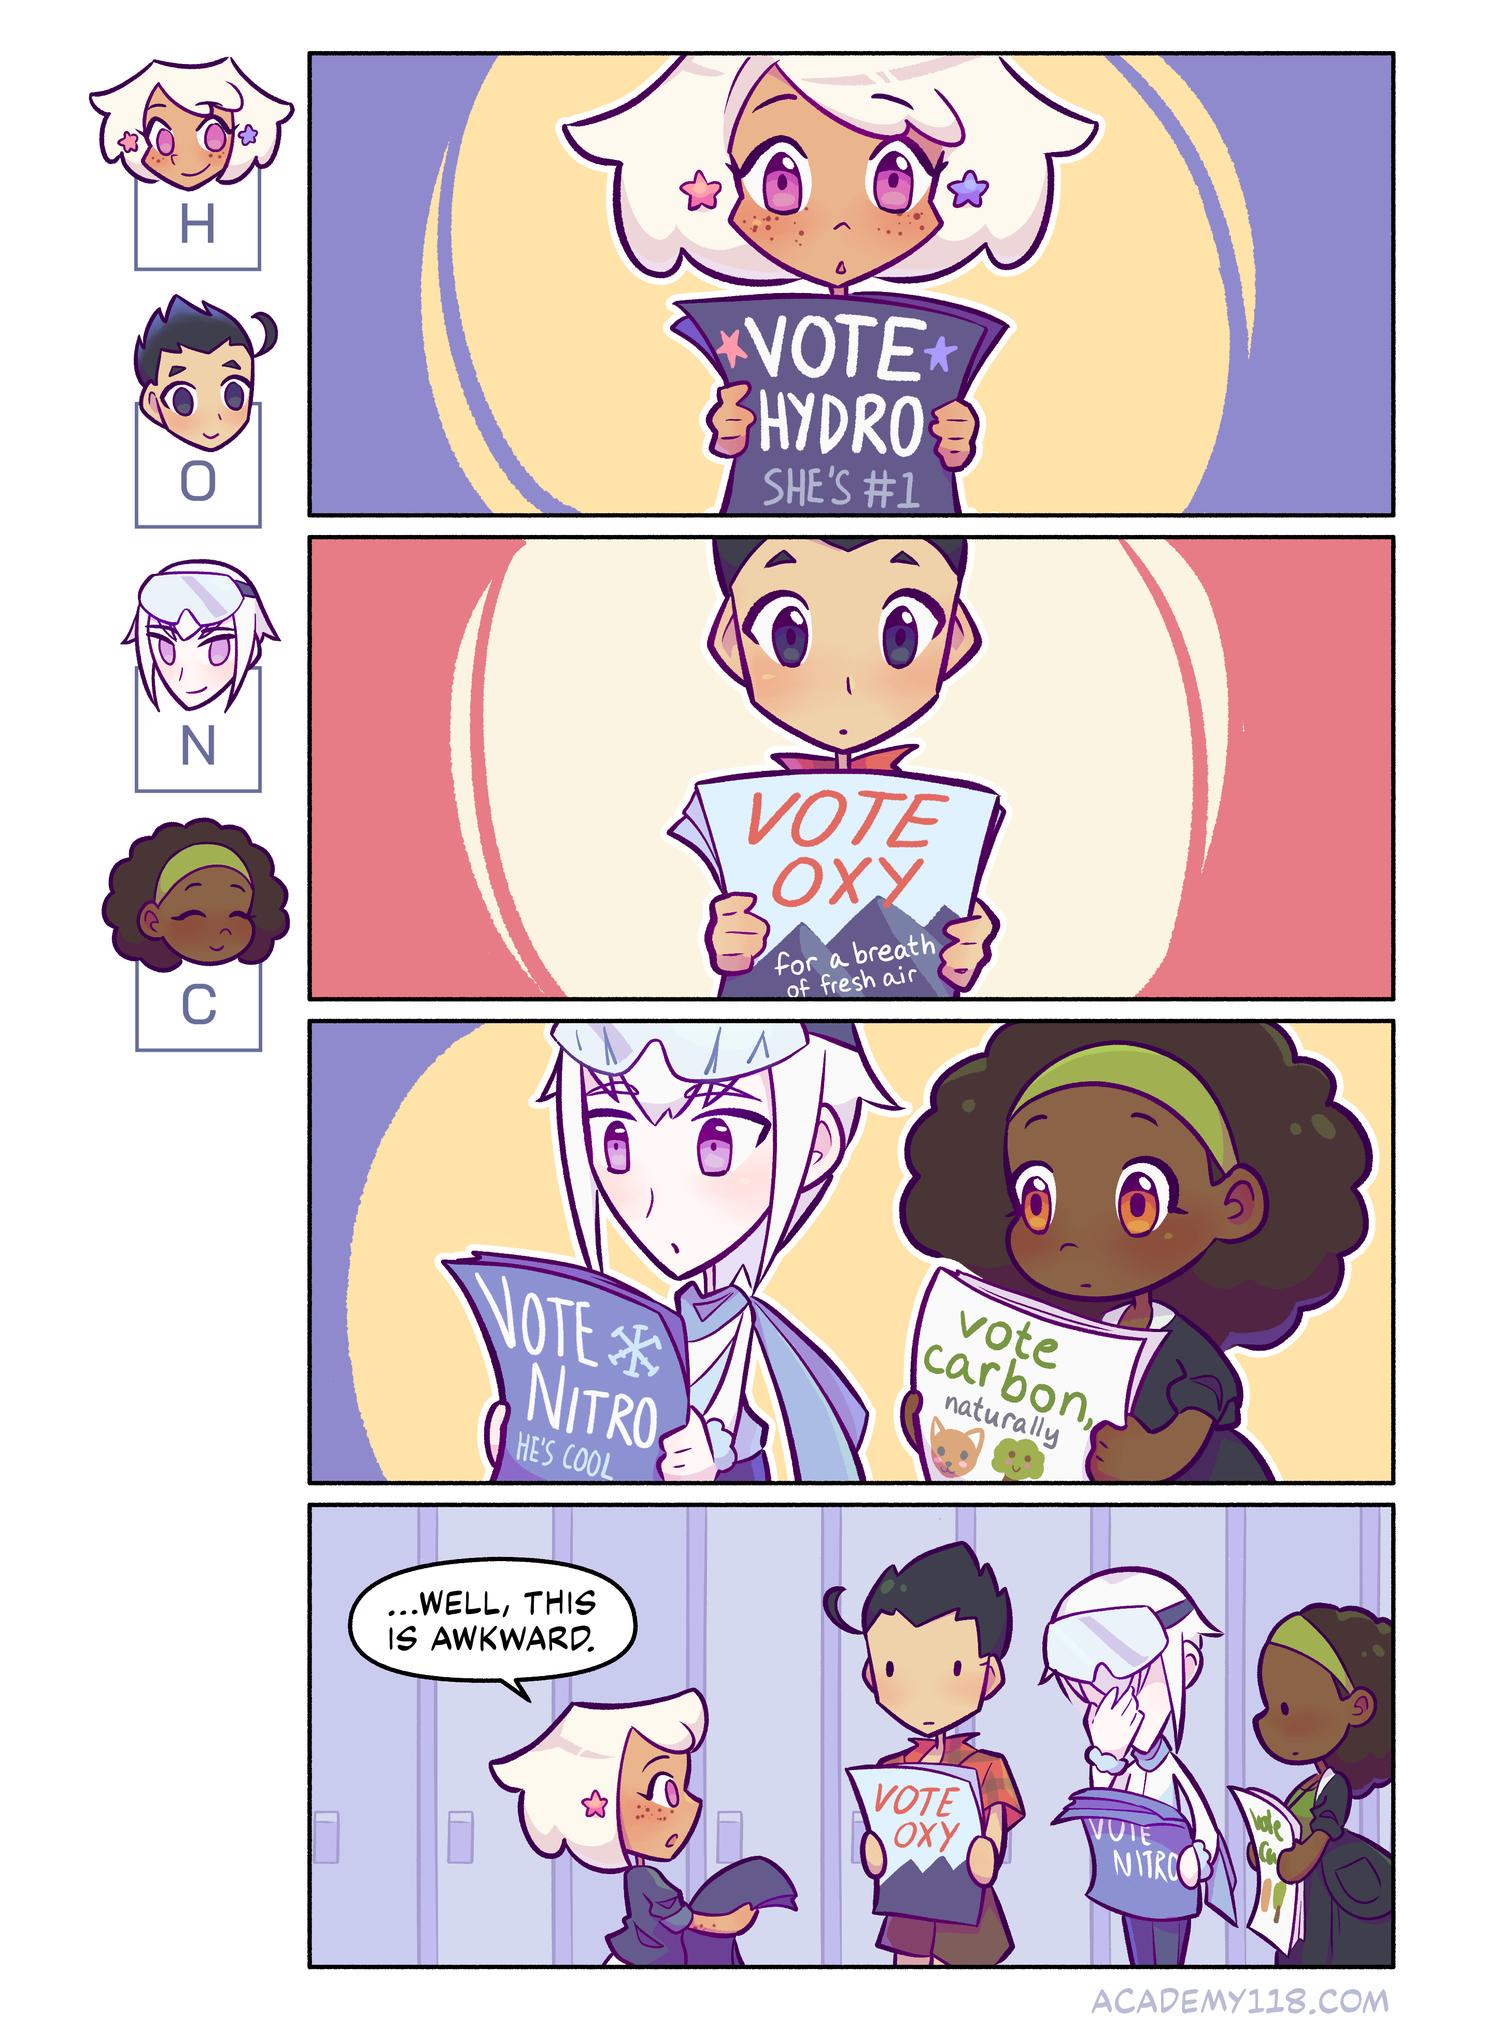 Hydrogen for President comic page 5